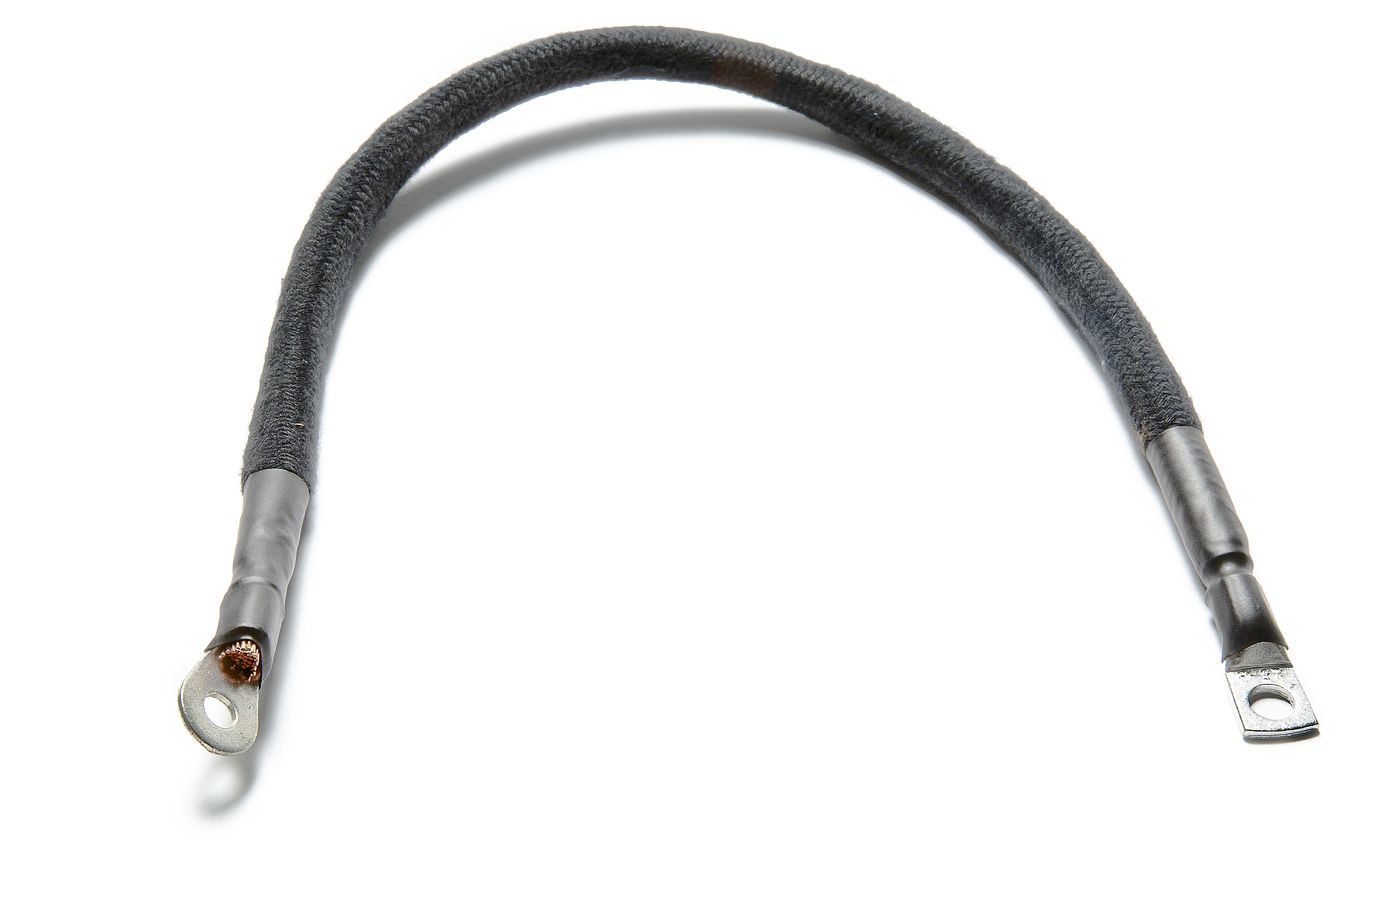 Kabel
Cable
Câble
Kabel
Cable
Cavo